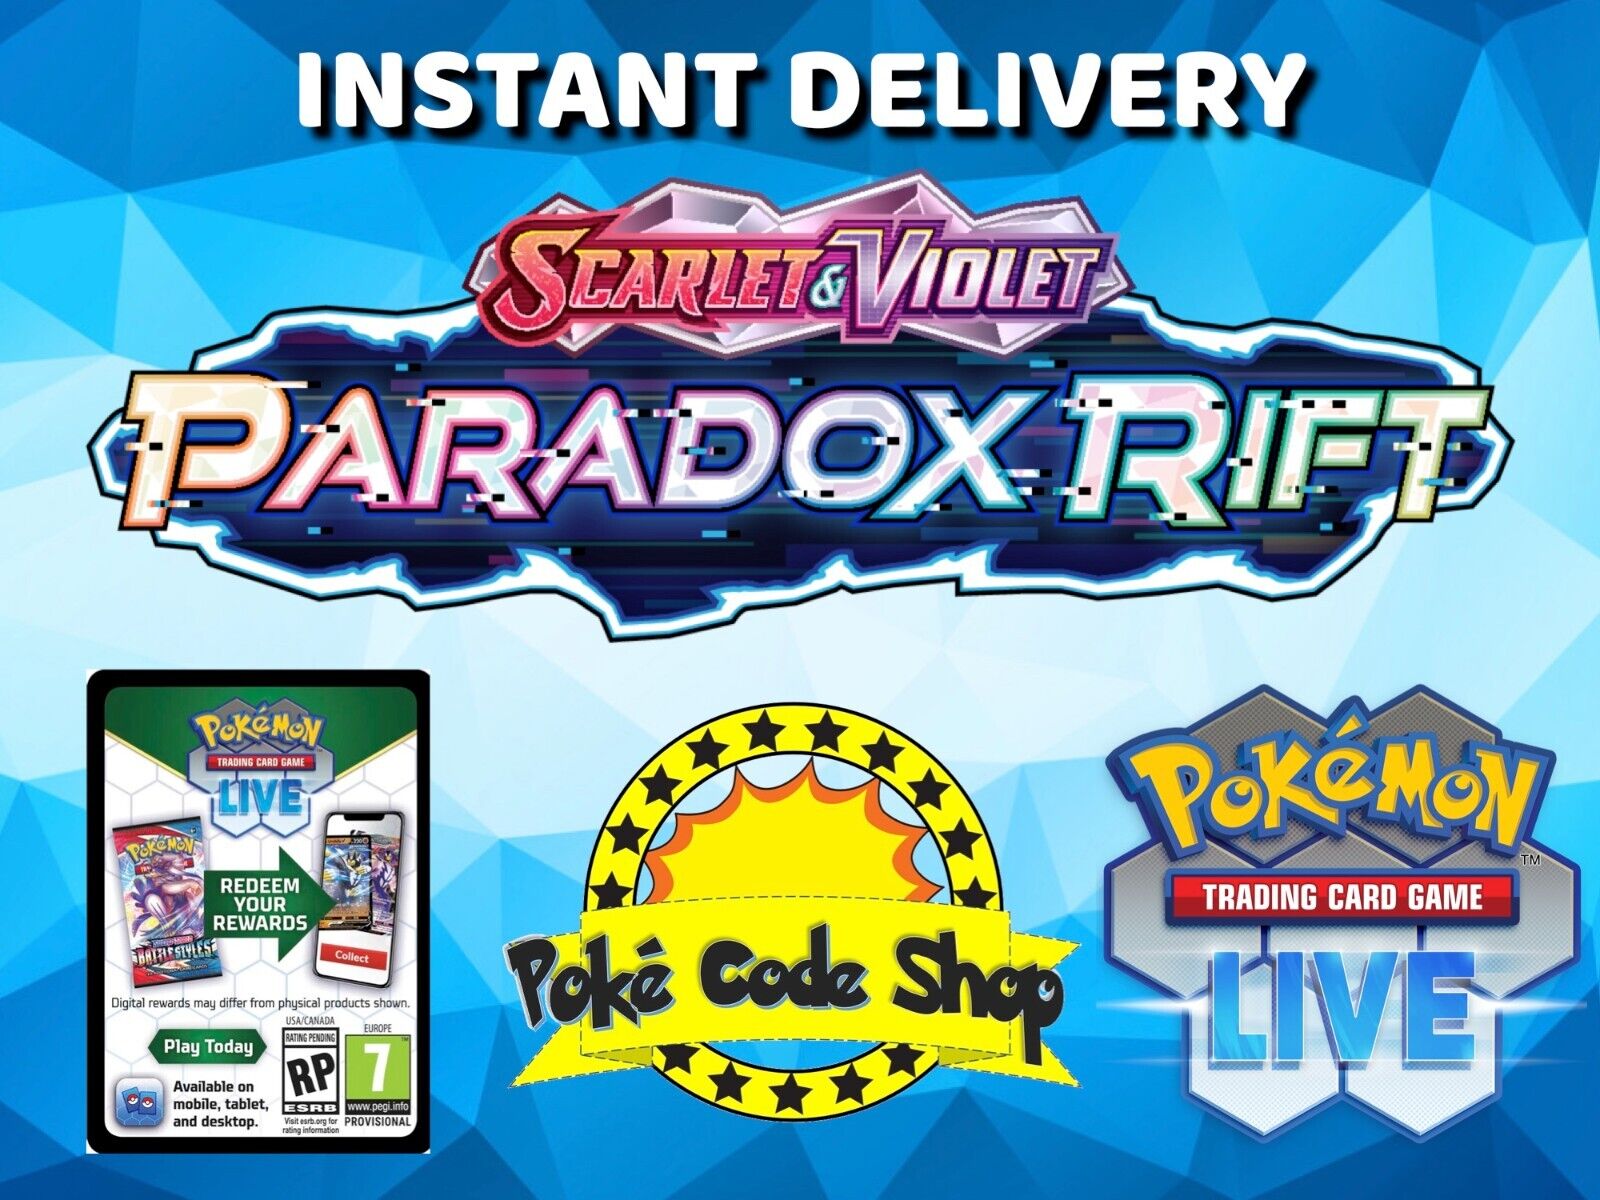 25 x PARADOX RIFT Live Pokemon Booster Codes Online INSTANT QR EMAIL DELIVERY